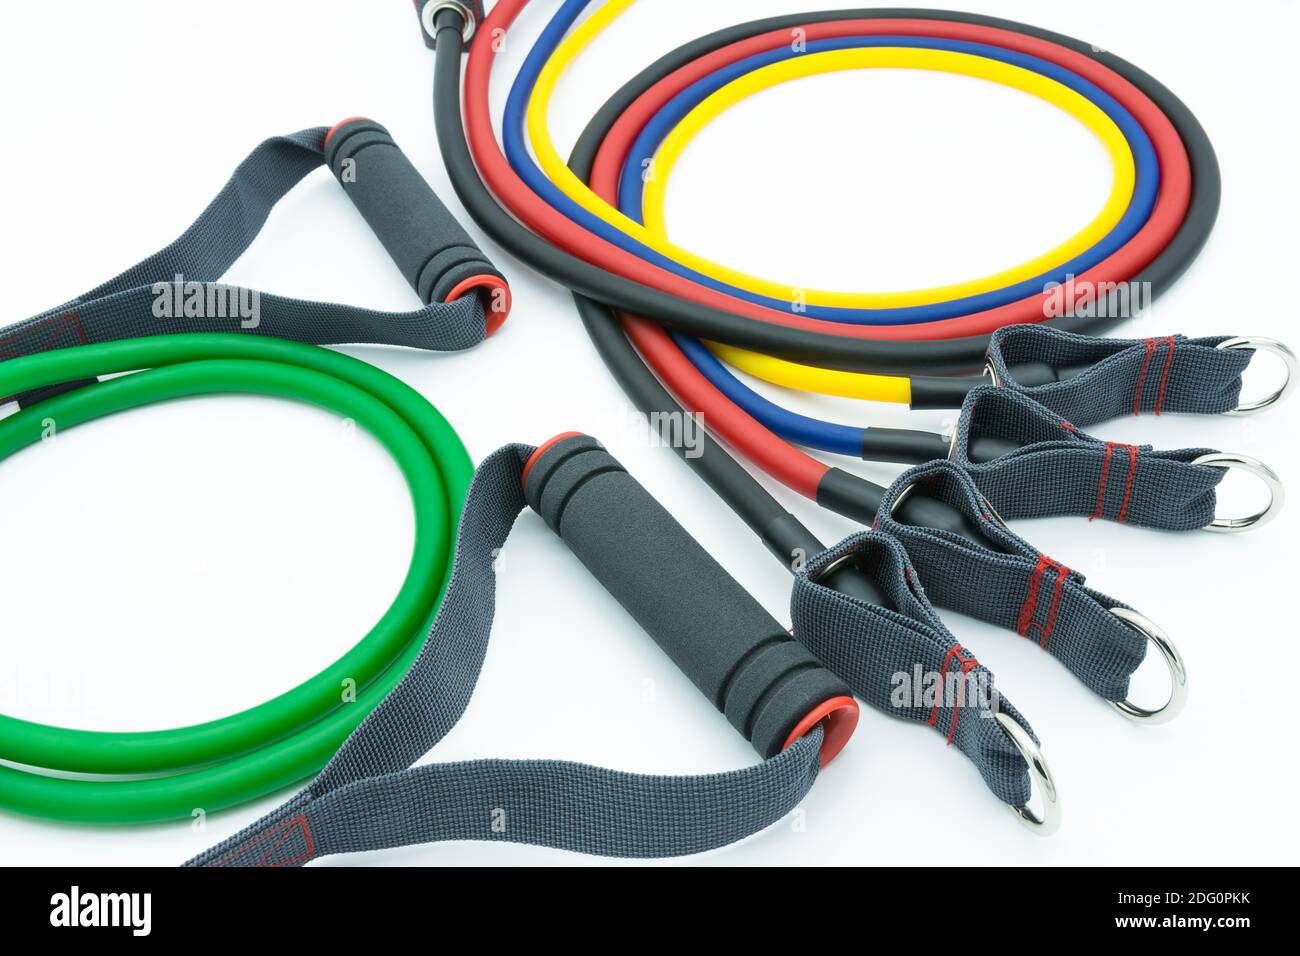 Colorful resistance bands isolated on the white background. Stock Photo